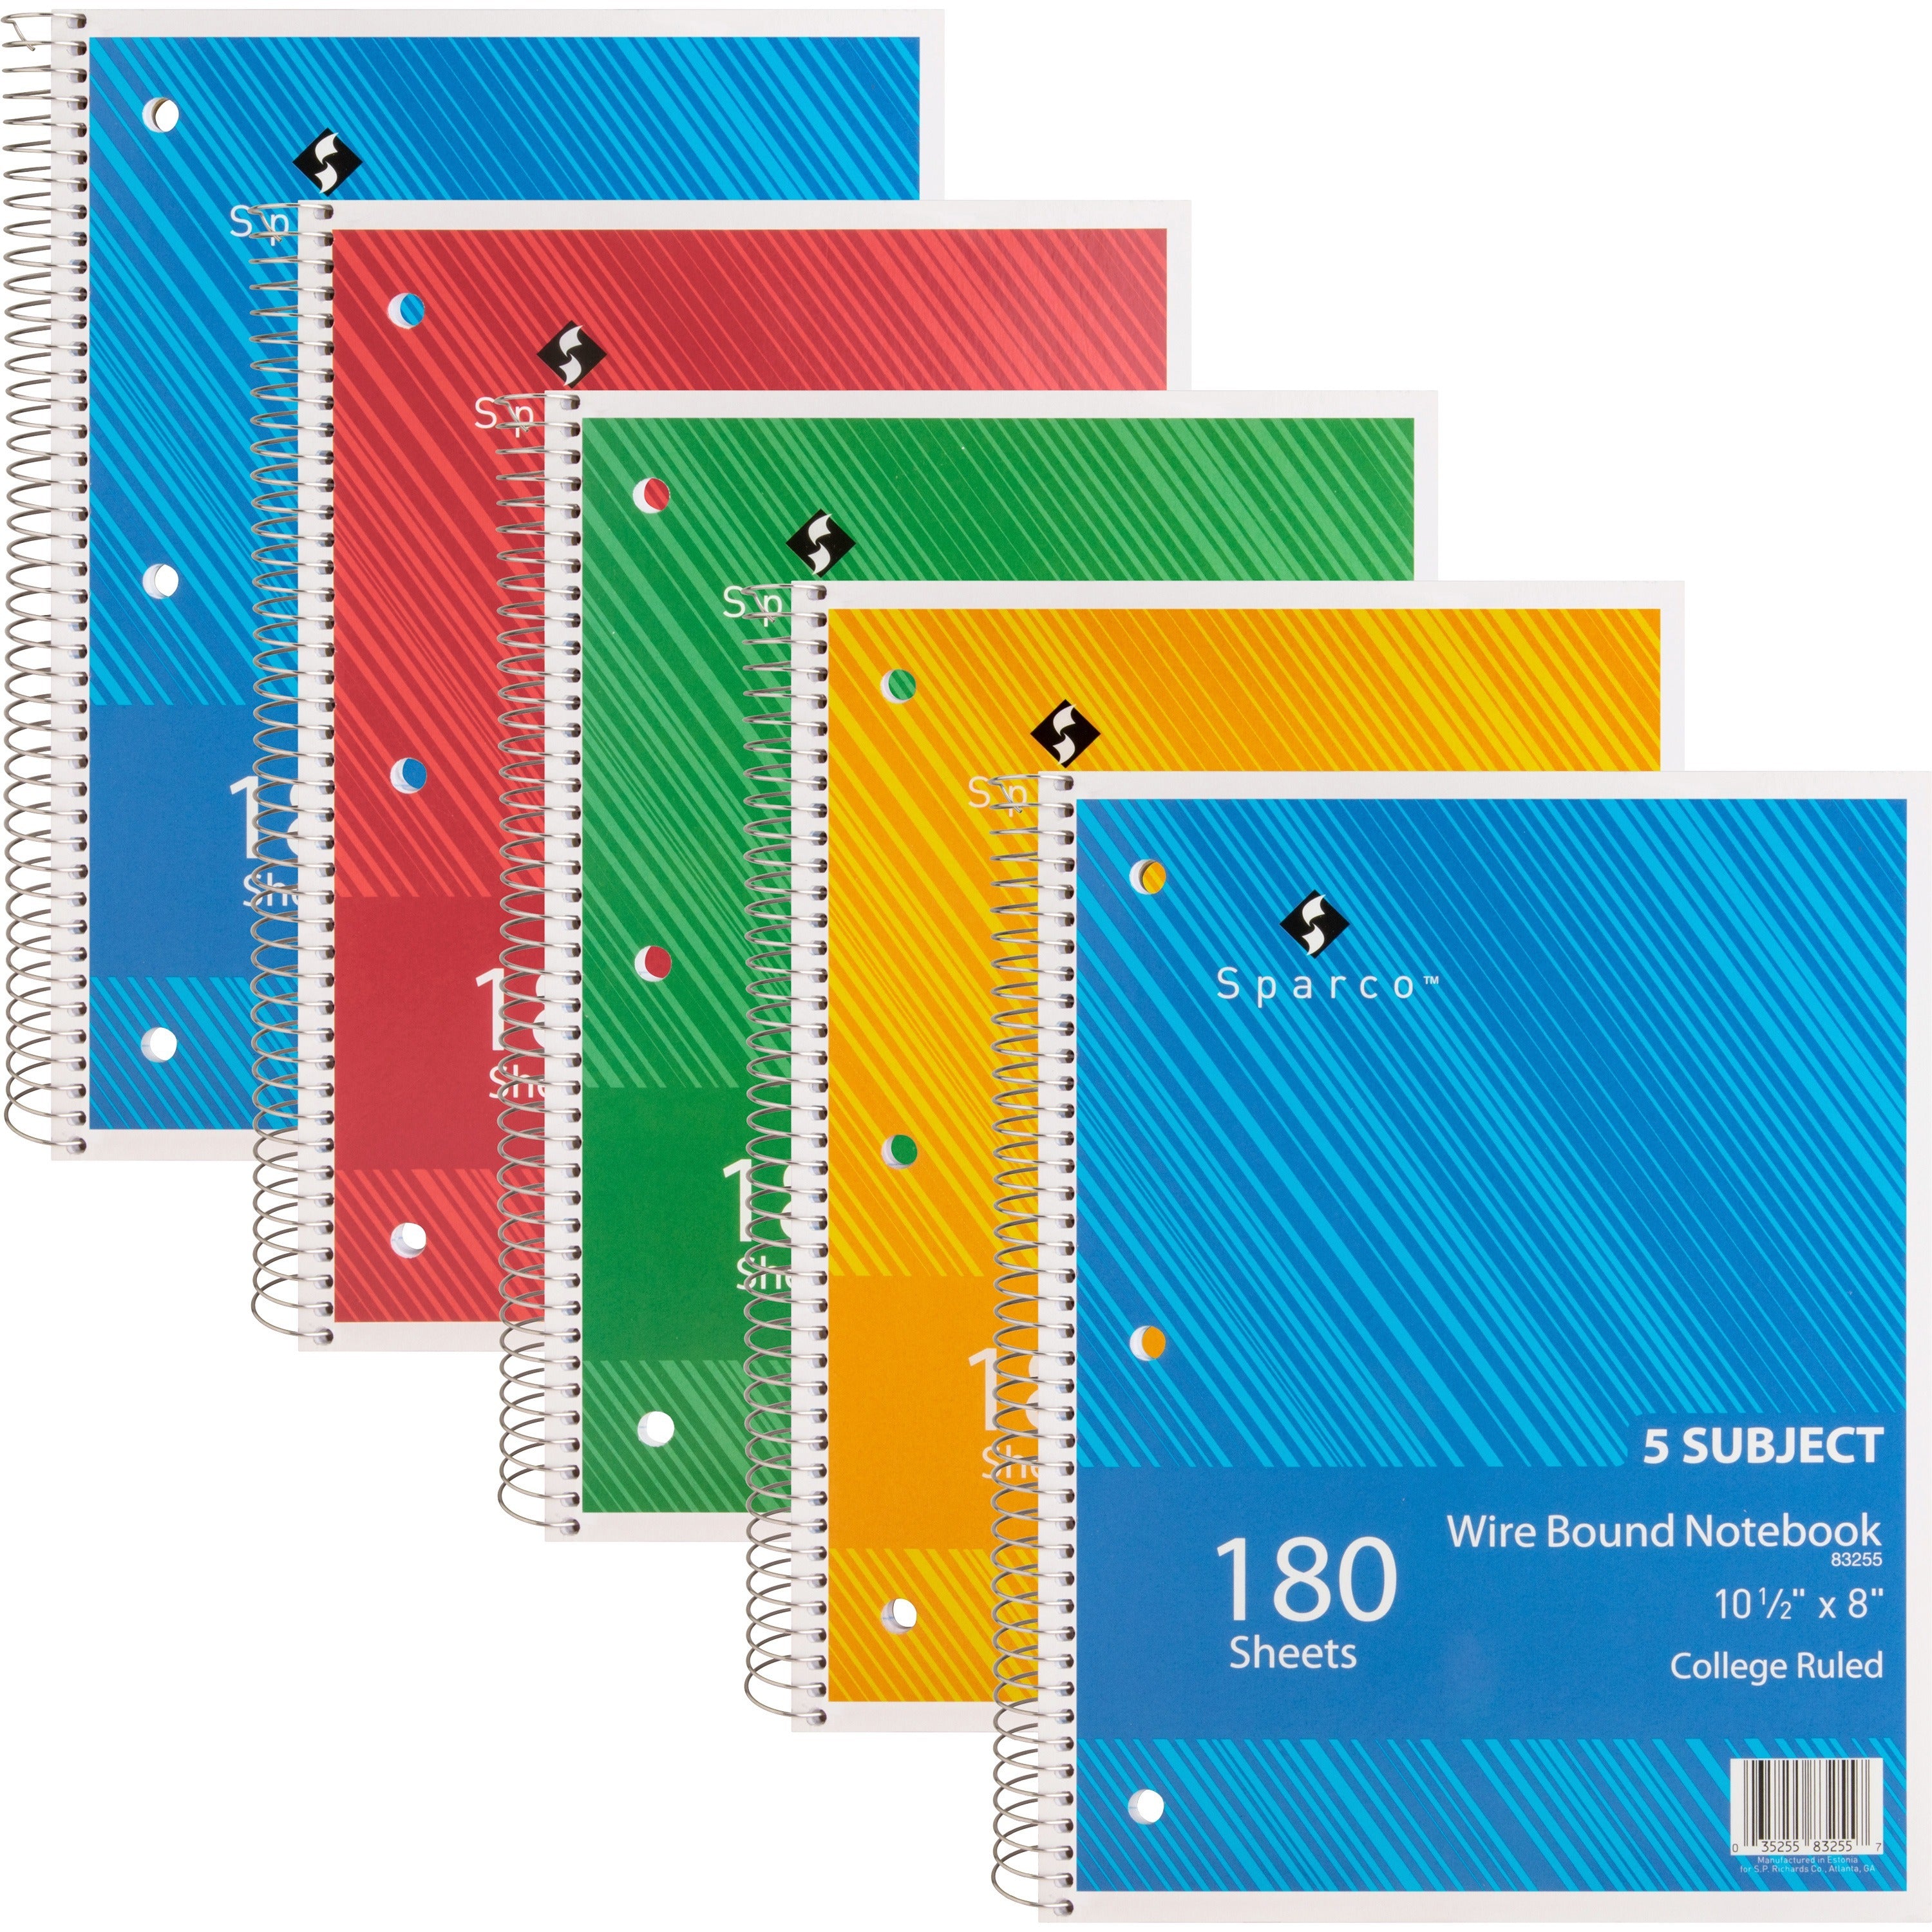 sparco-wirebound-college-ruled-notebooks-180-sheets-wire-bound-college-ruled-unruled-margin-8-x-10-1-2-assorted-paper-assortedchipboard-cover-resist-bleed-through-subject-stiff-back-stiff-cover-5-bundle_spr83255bd - 1